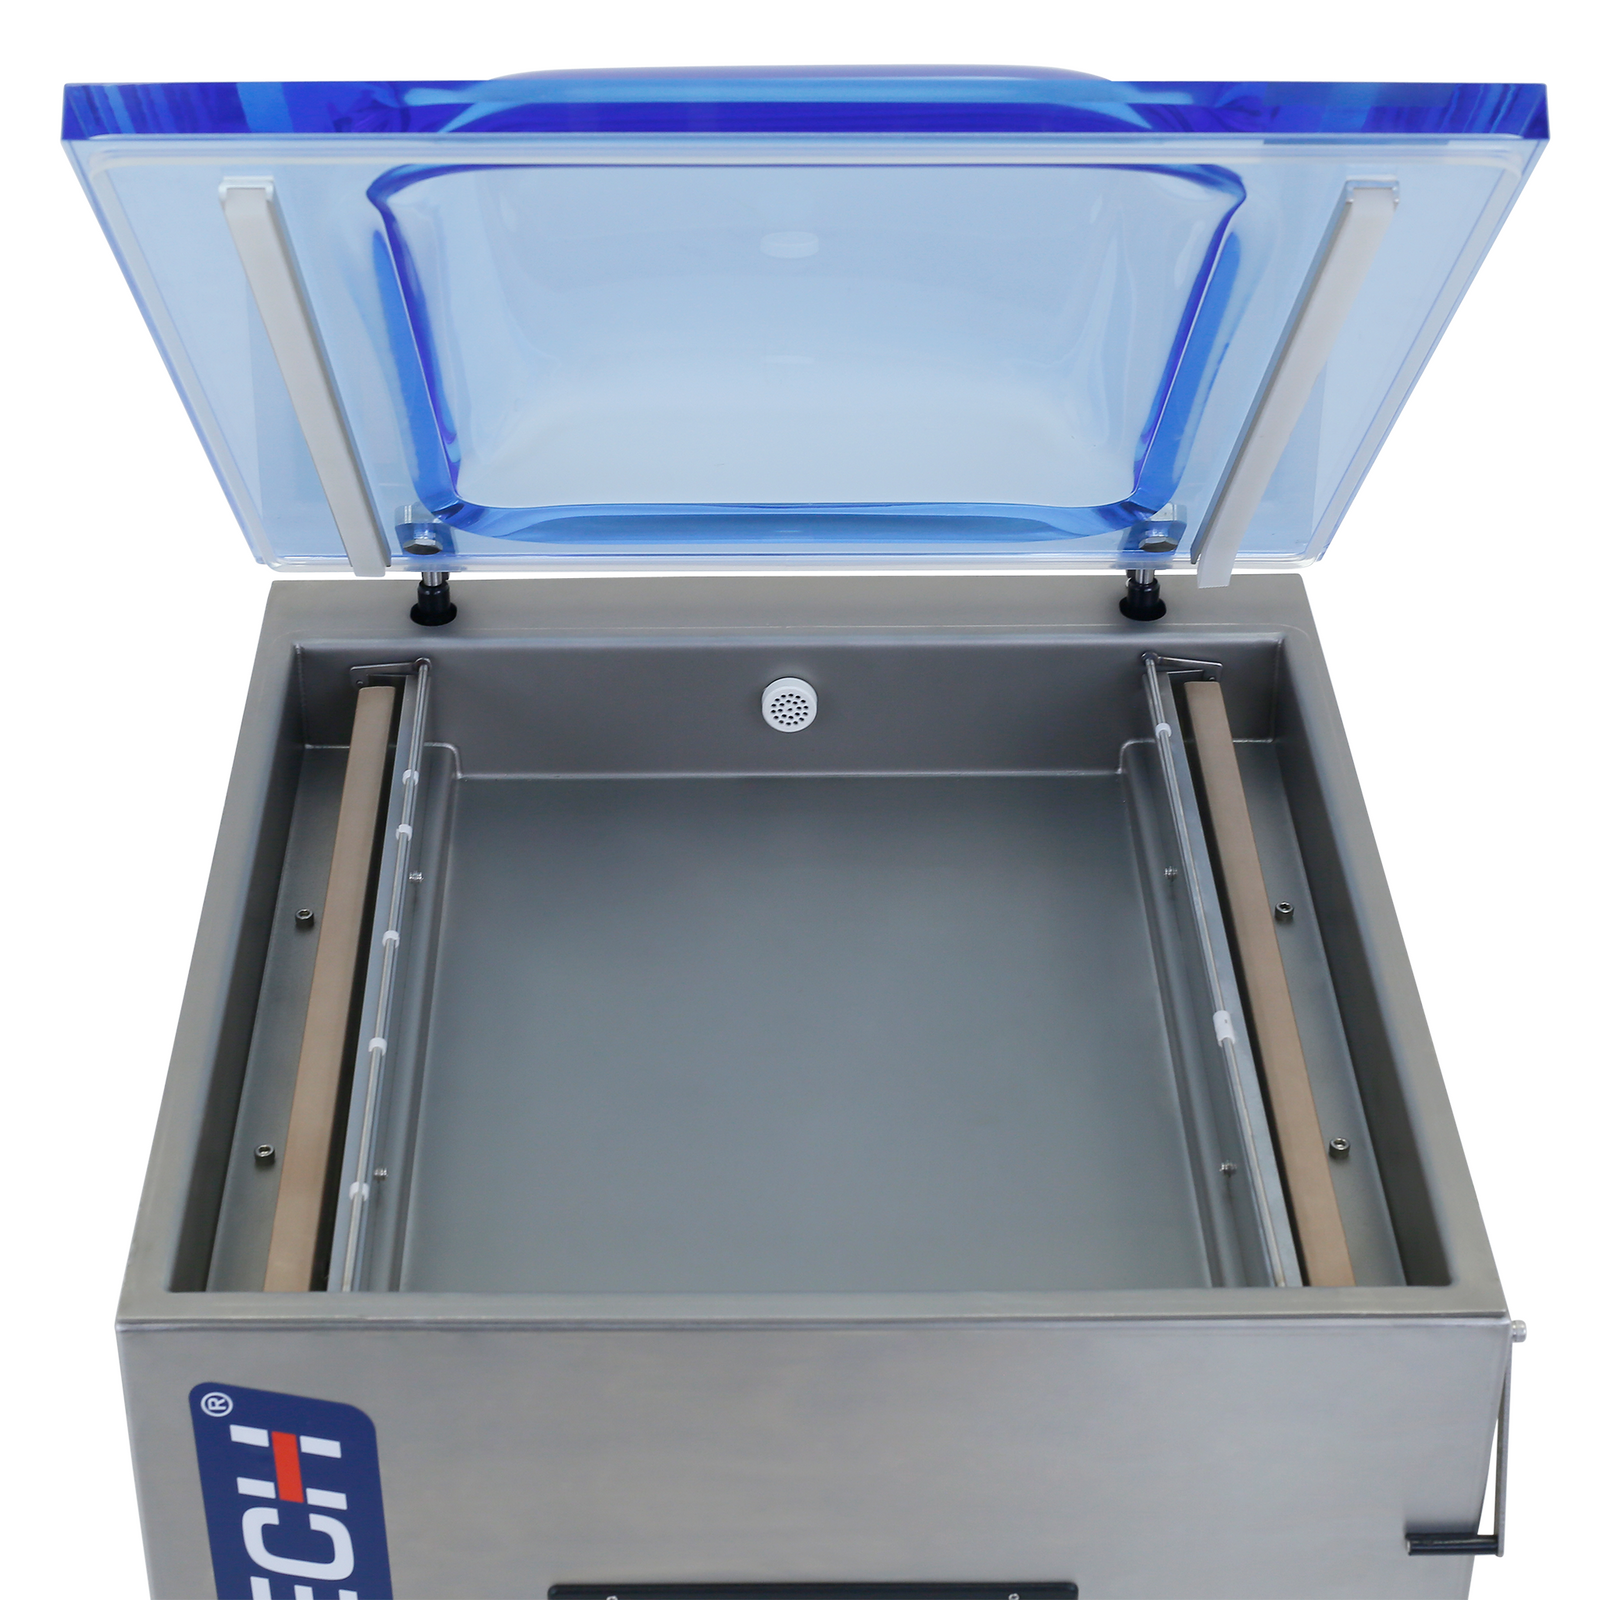 Commercial self standing single chamber vacuum sealer with the lid open. Image show the interior of the chamber and the 2 sealing bars